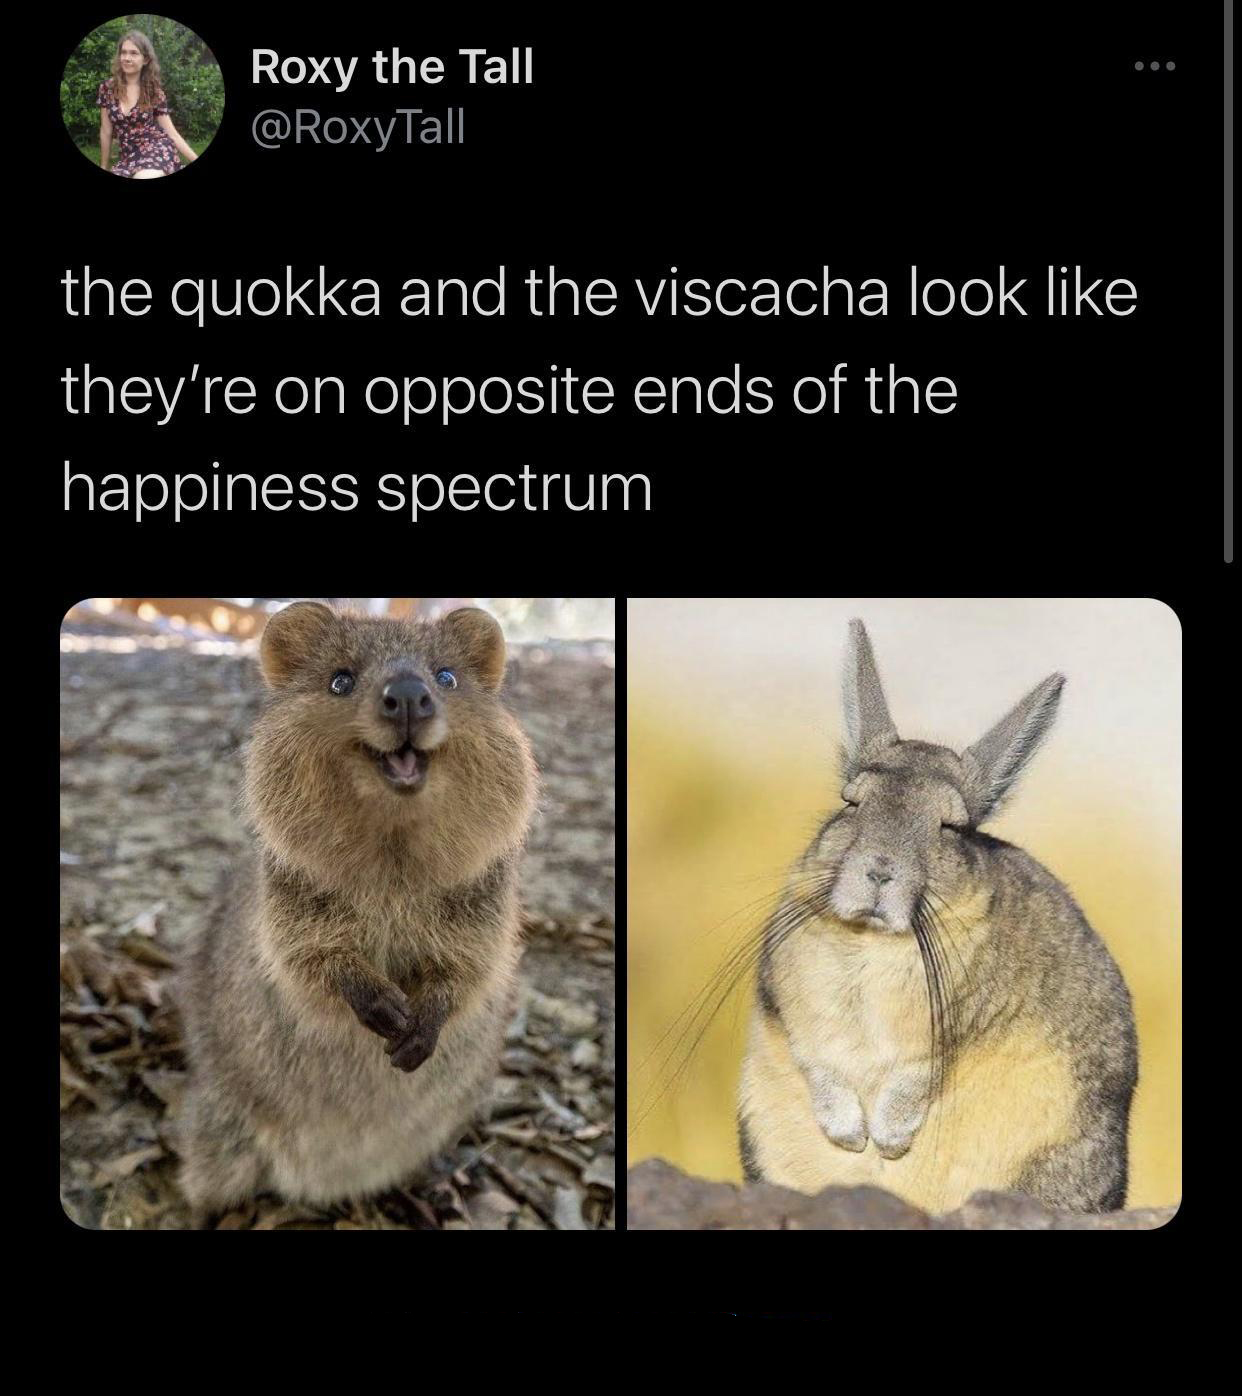 dank memes - quokka and viscacha - Roxy the Tall the quokka and the viscacha look they're on opposite ends of the happiness spectrum